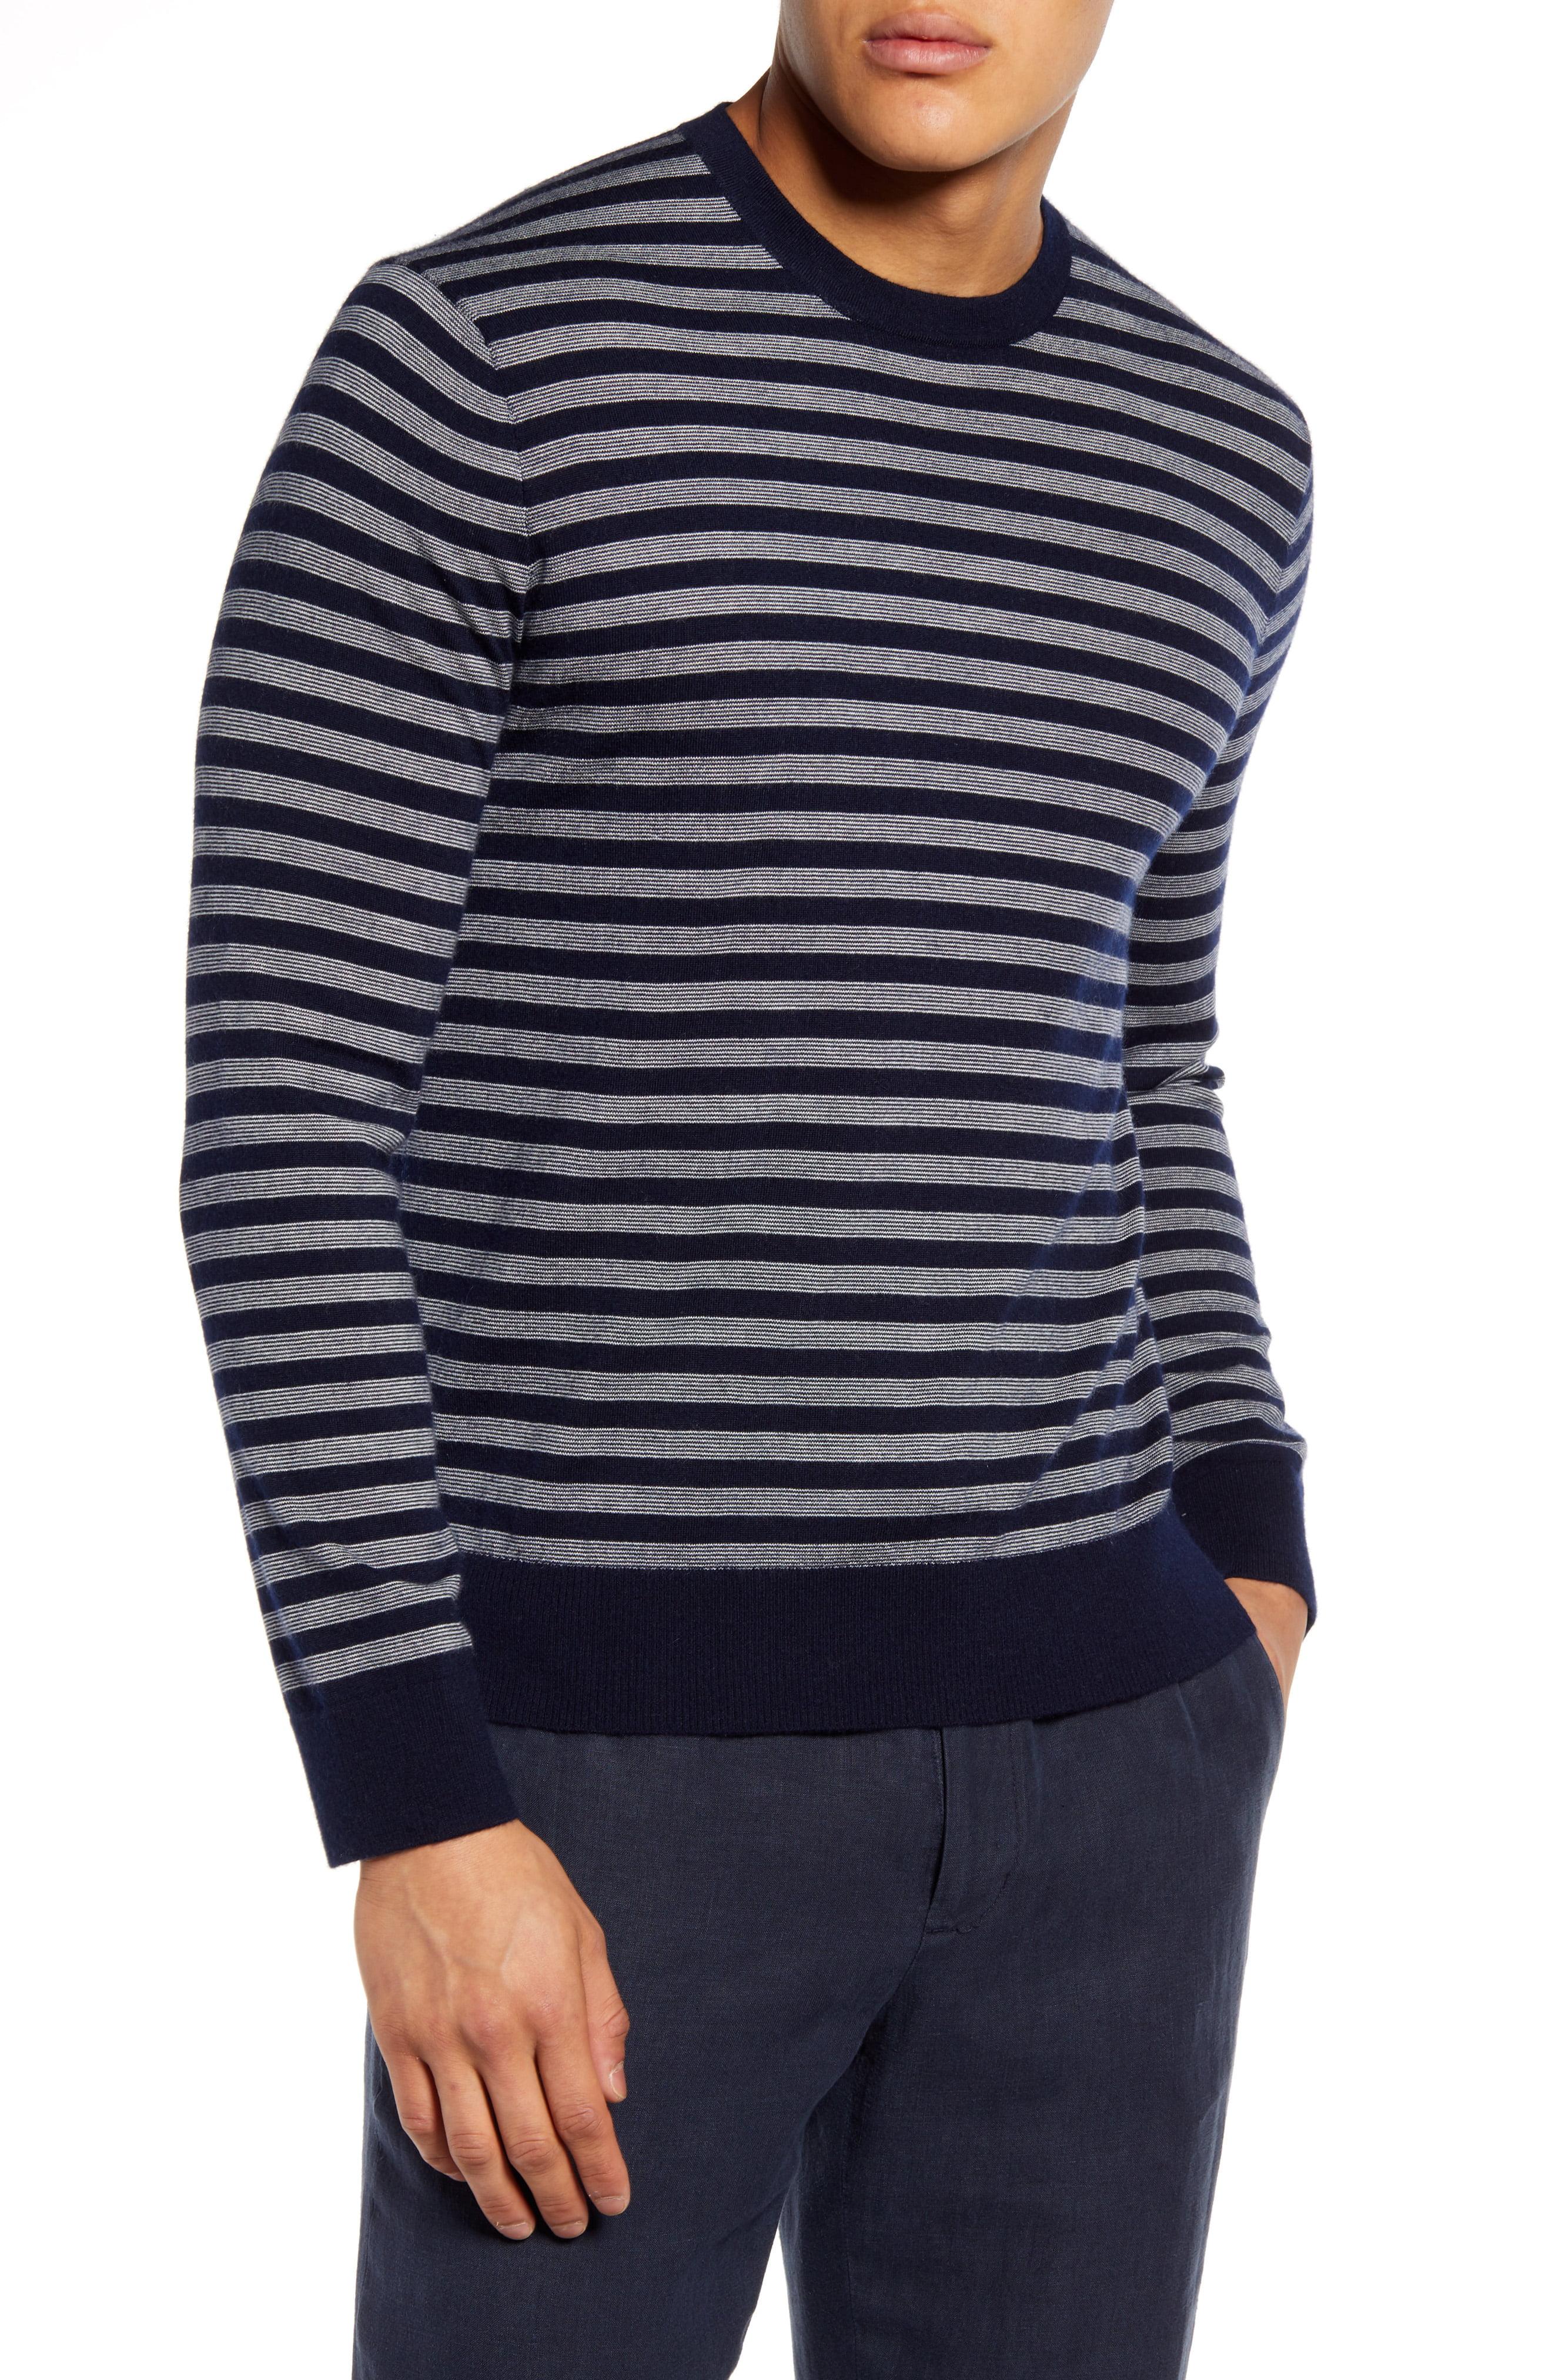 Vince Stripe Crewneck Wool And Cashmere Sweater In Blue For Men Lyst